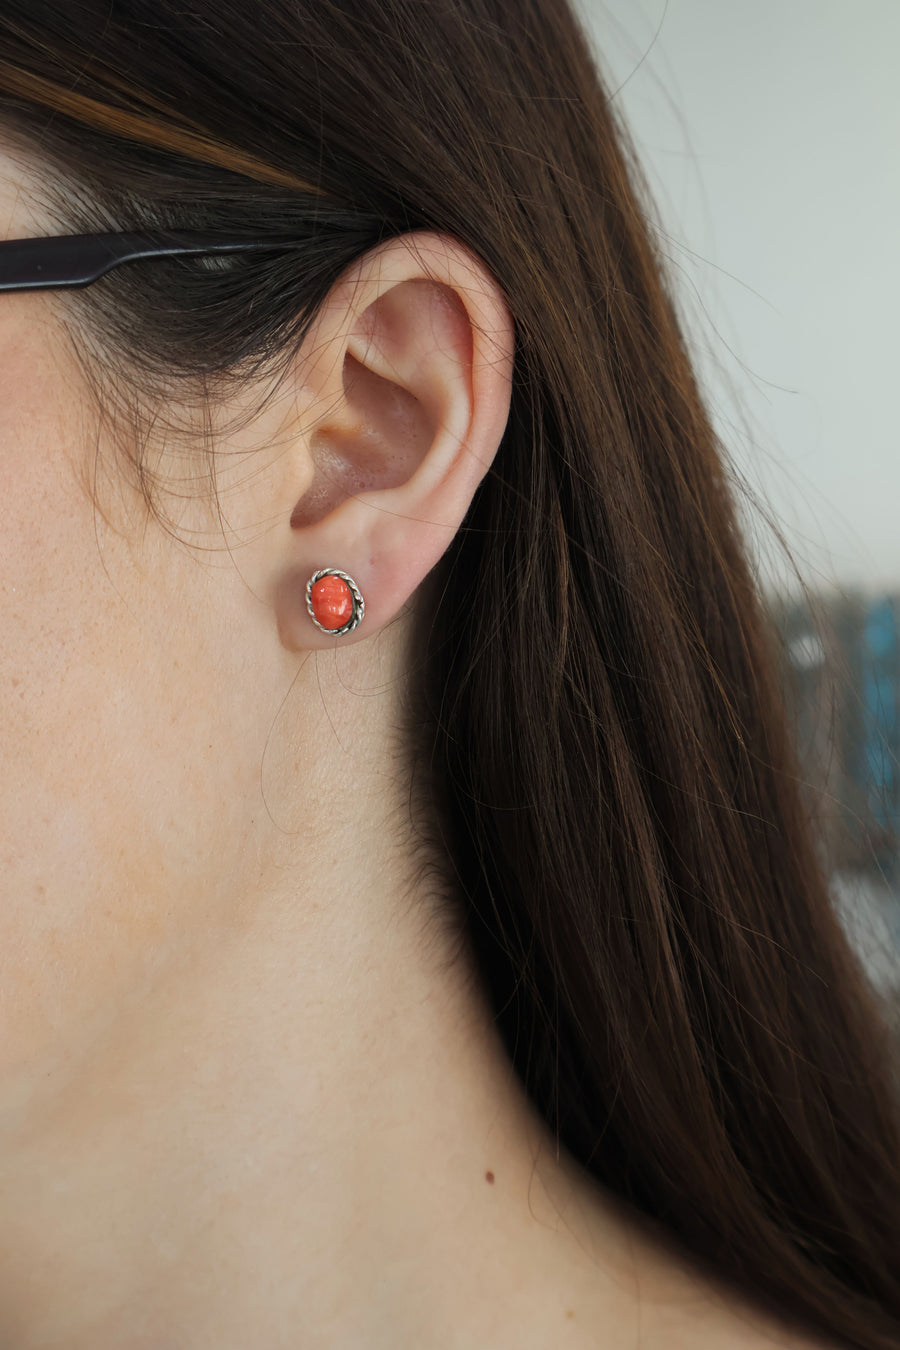 Double Twist Oval Studs - Red Spiny Oyster